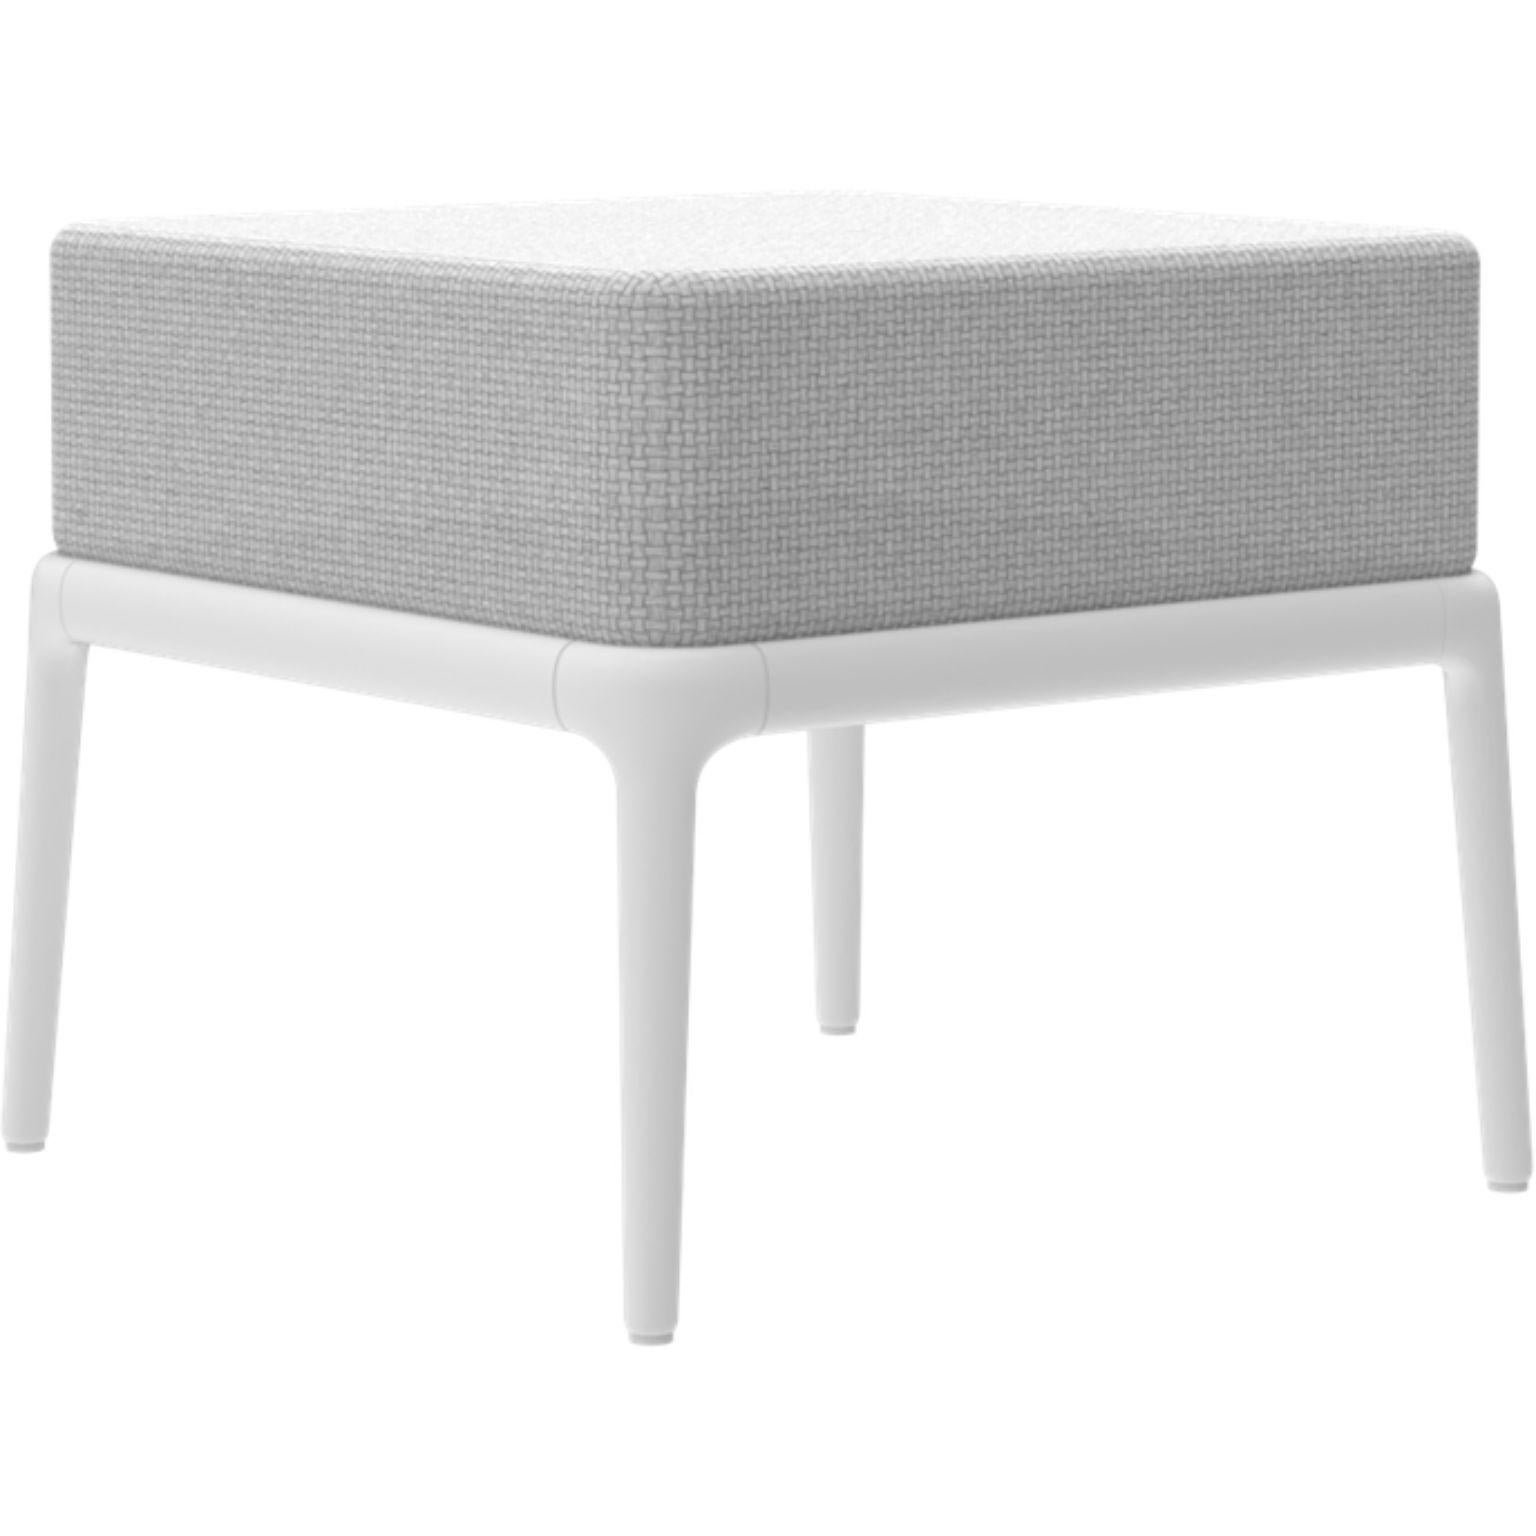 Xaloc white Pouf 50 by Mowee
Dimensions: D 50 x W 50 x H 43 cm
Material: Aluminium, Textile
Weight: 7 kg
Also available in different colours and finishes.

 Xaloc synthesizes the lines of interior furniture to extrapolate to the exterior,